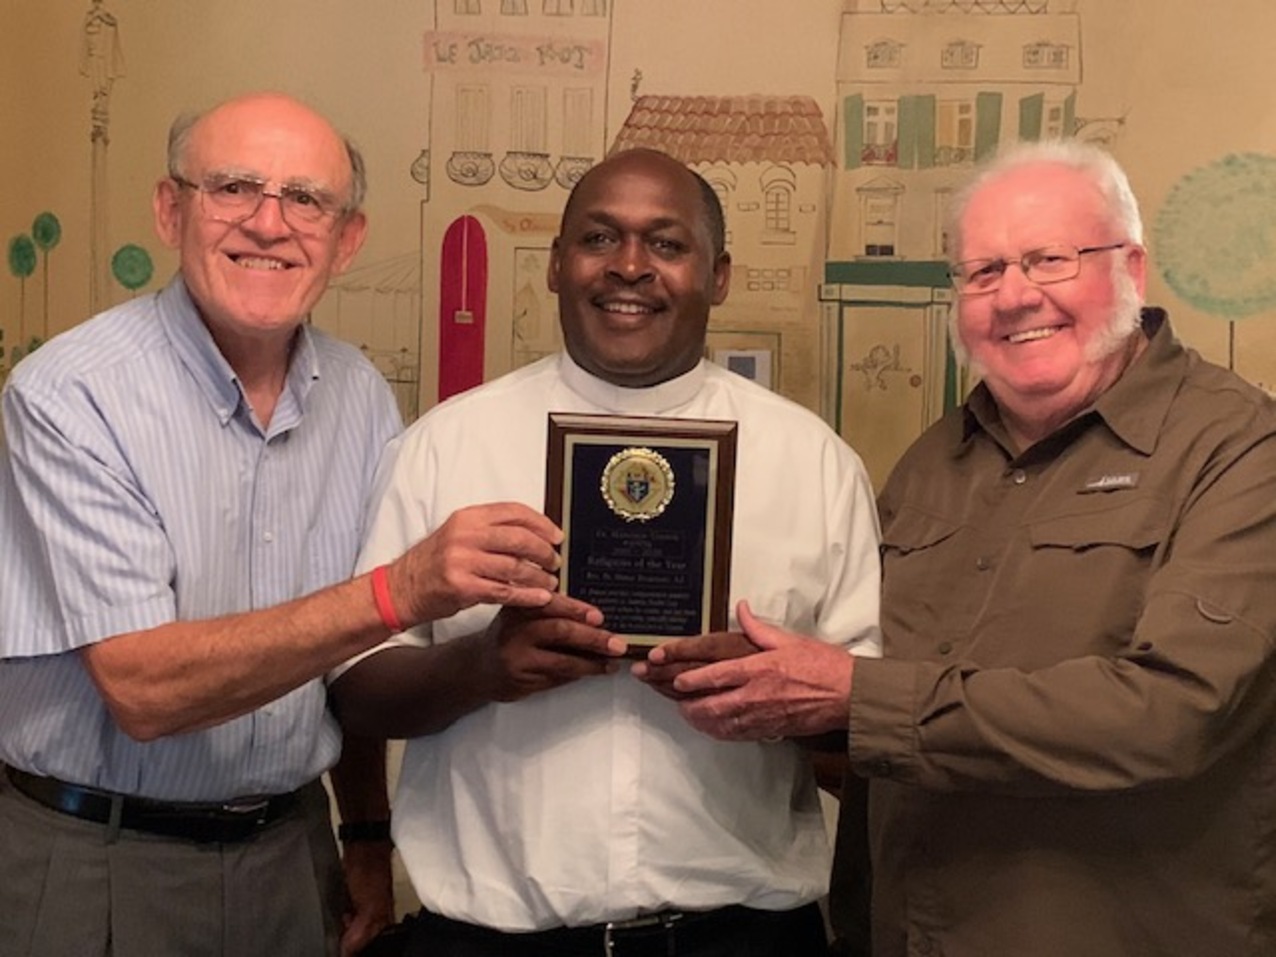 Knights of Columbus members surprise hospital chaplain with award 